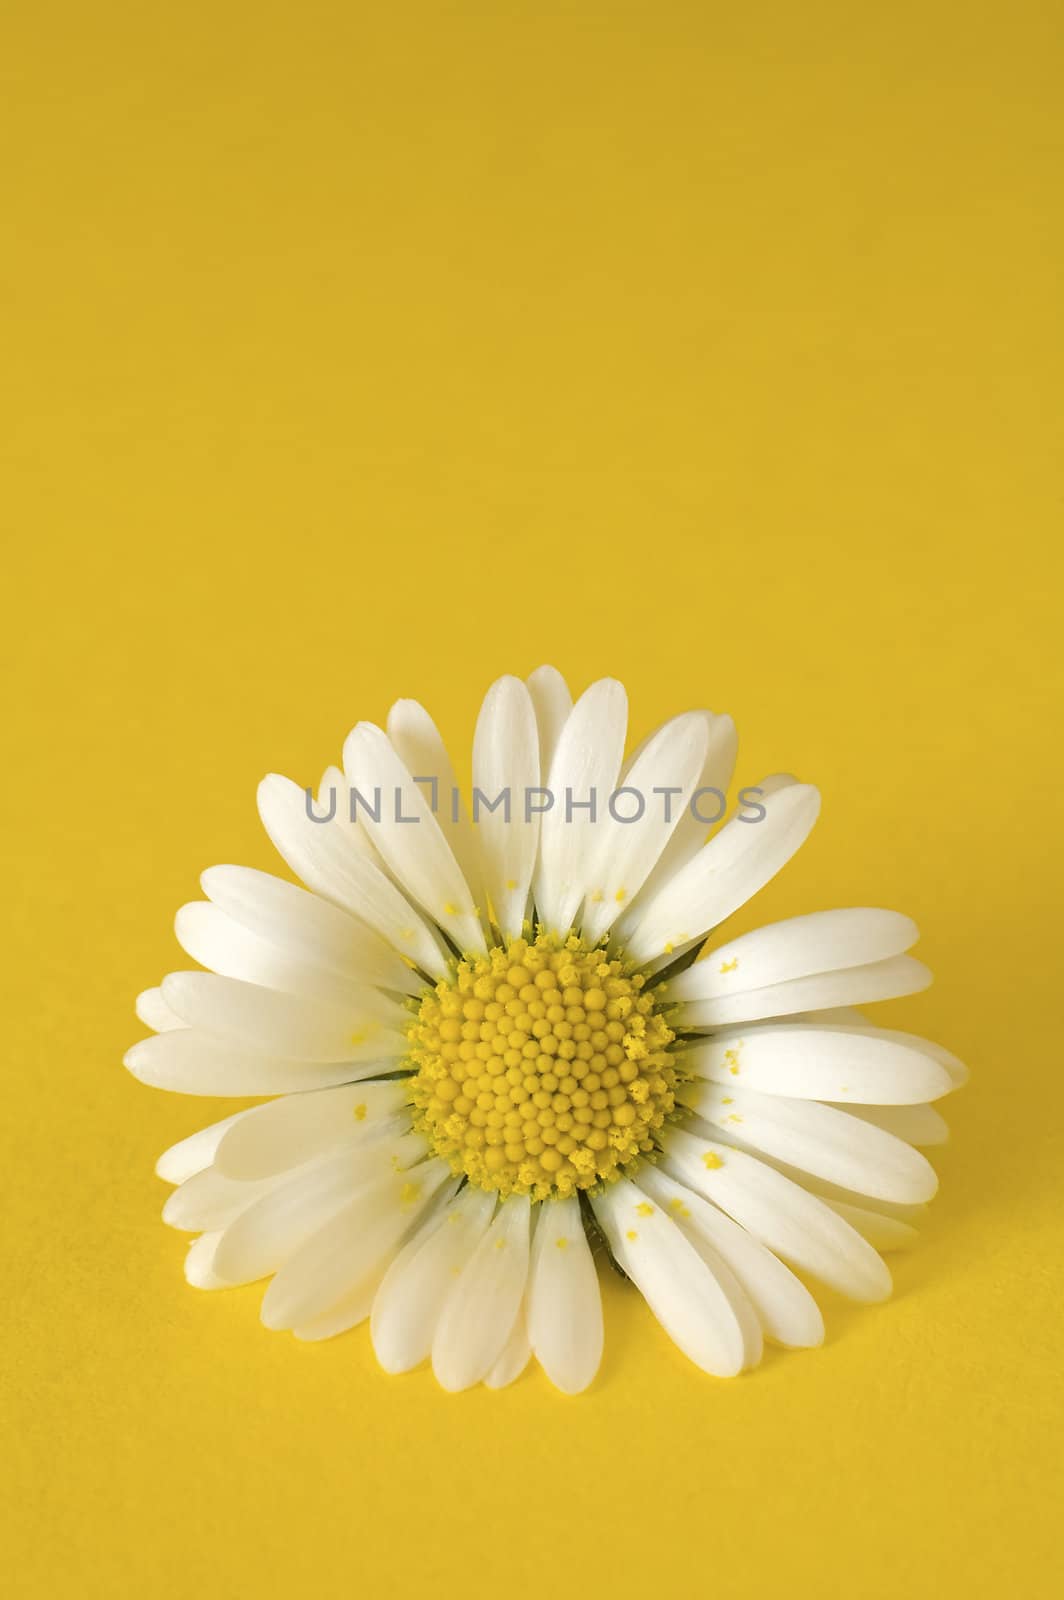 Daisy flower on clear yellow background